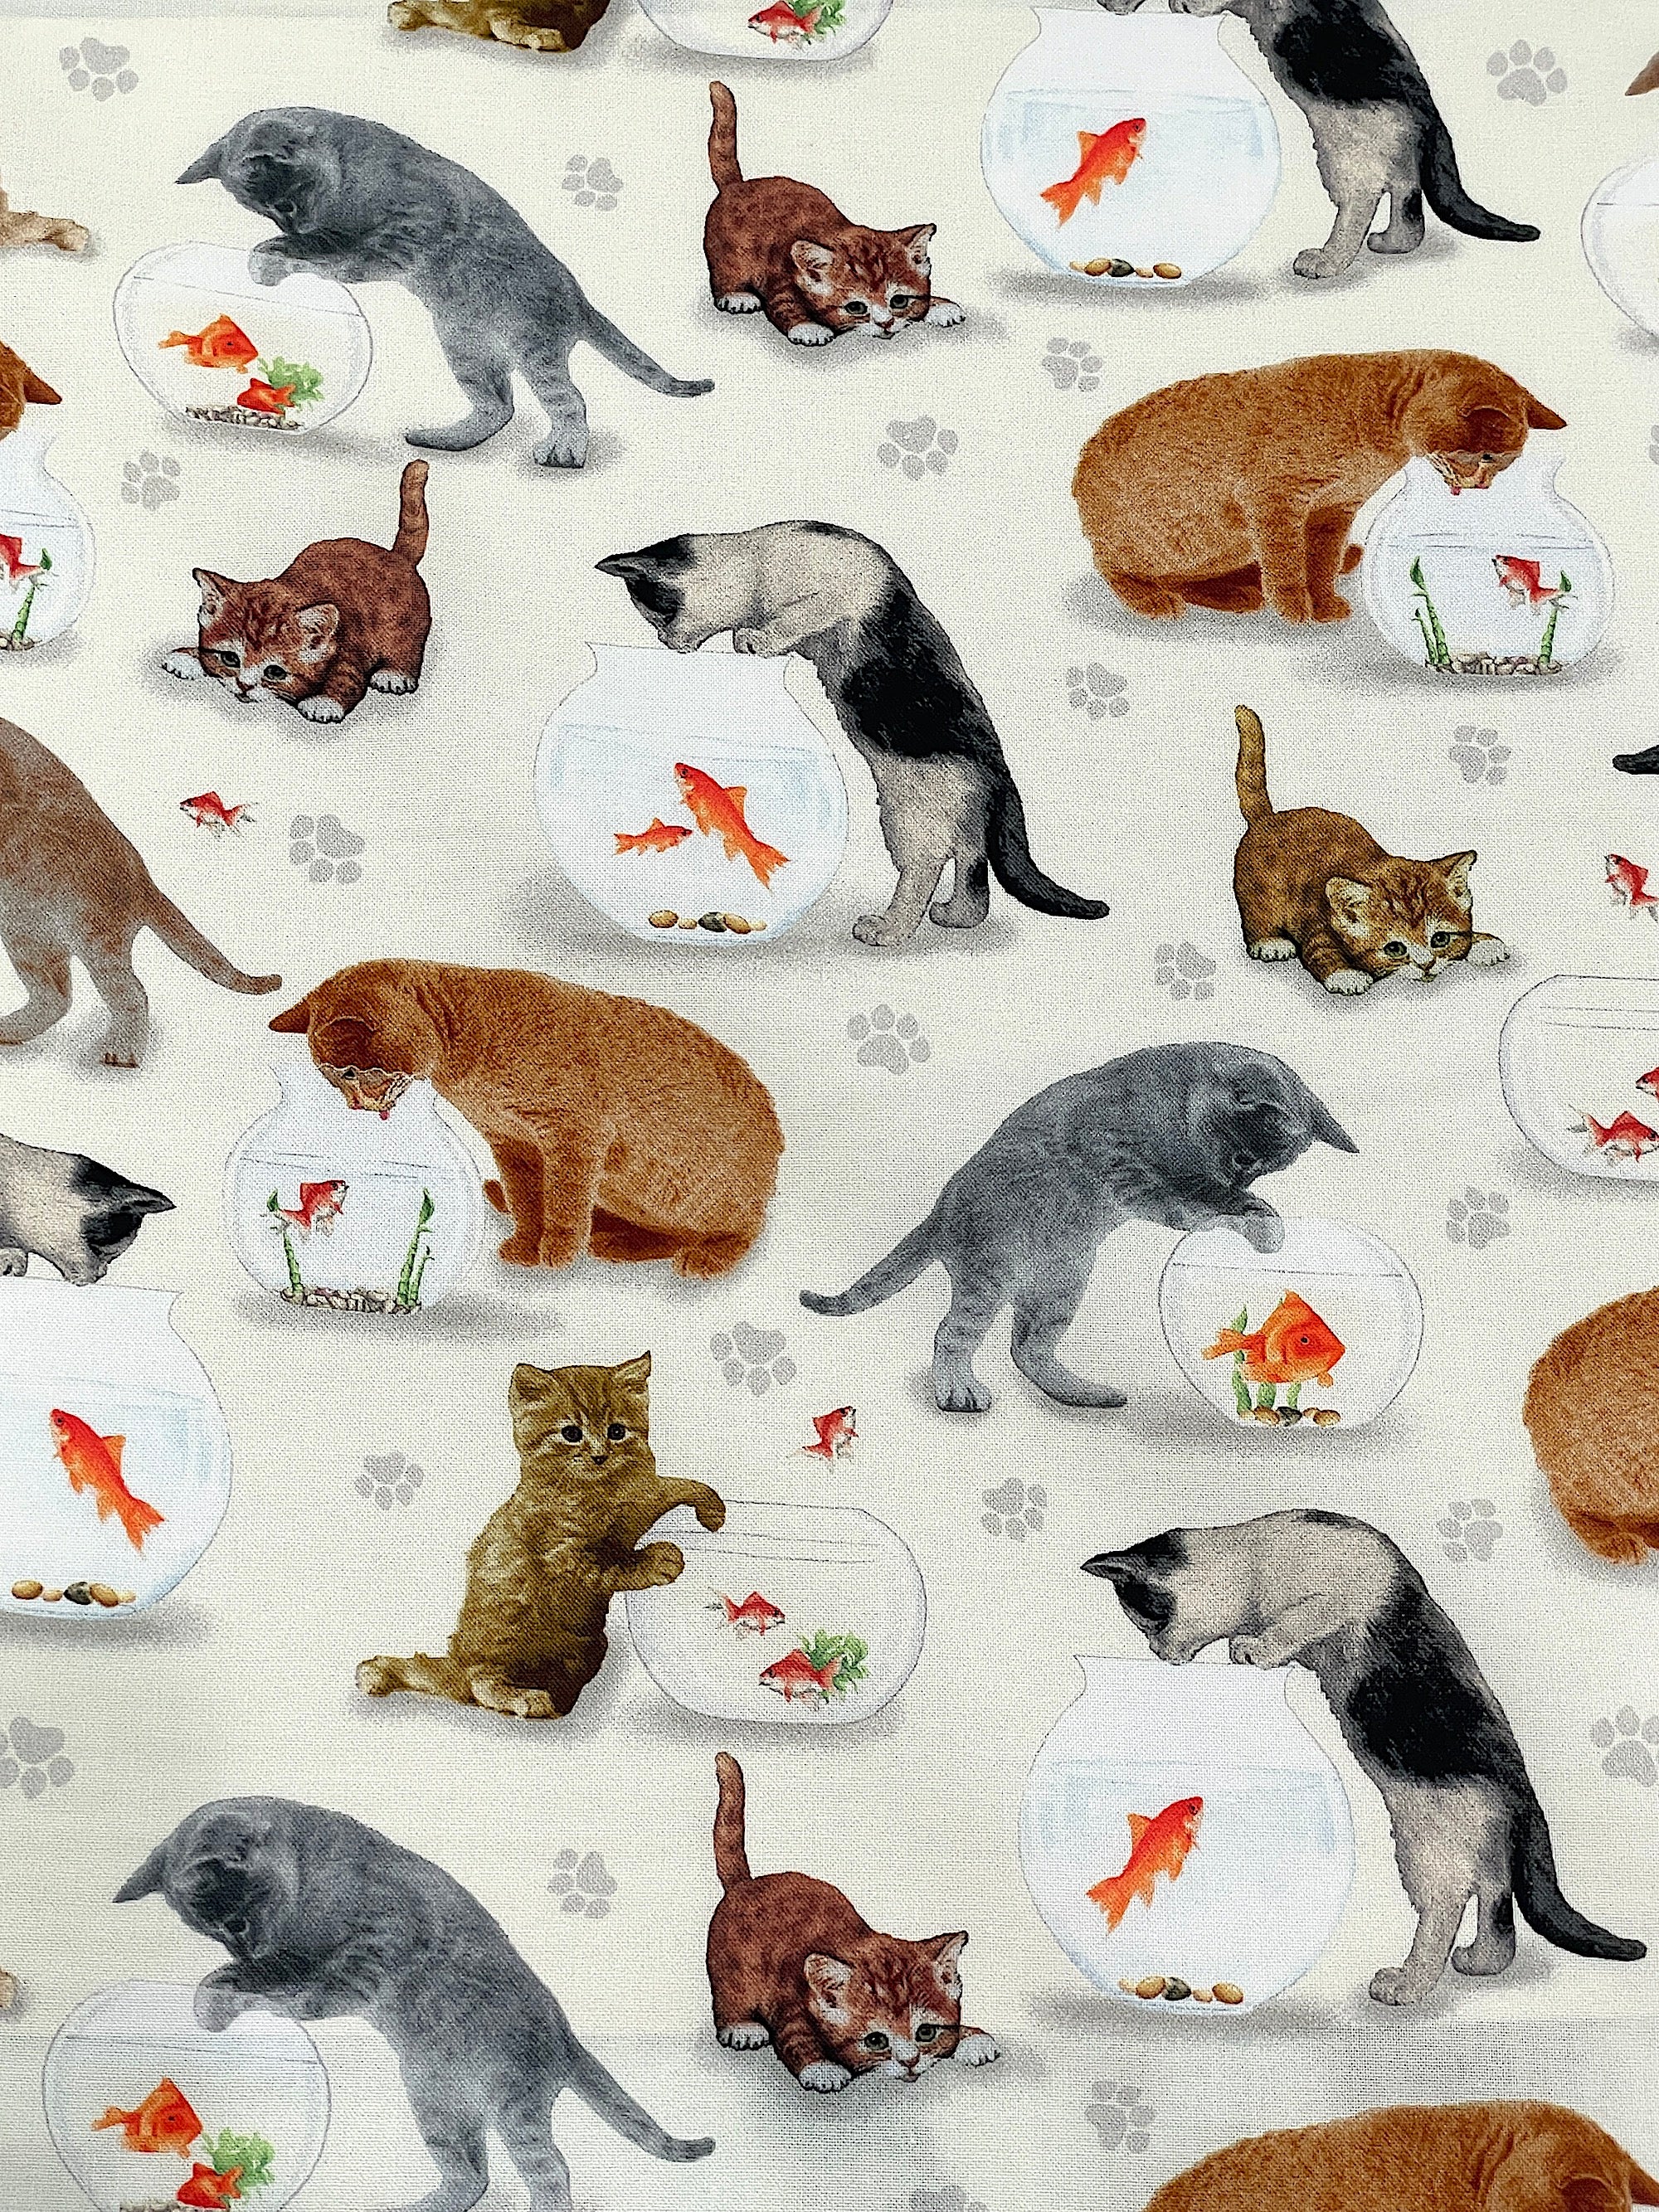 This cream colored cotton fabric is covered with cats and bowls of fish. The cats are a variety of colors such as grey, beige, brown and orange and they are either looking in at the fish or putting their paws in like they are trying to get a fish snack